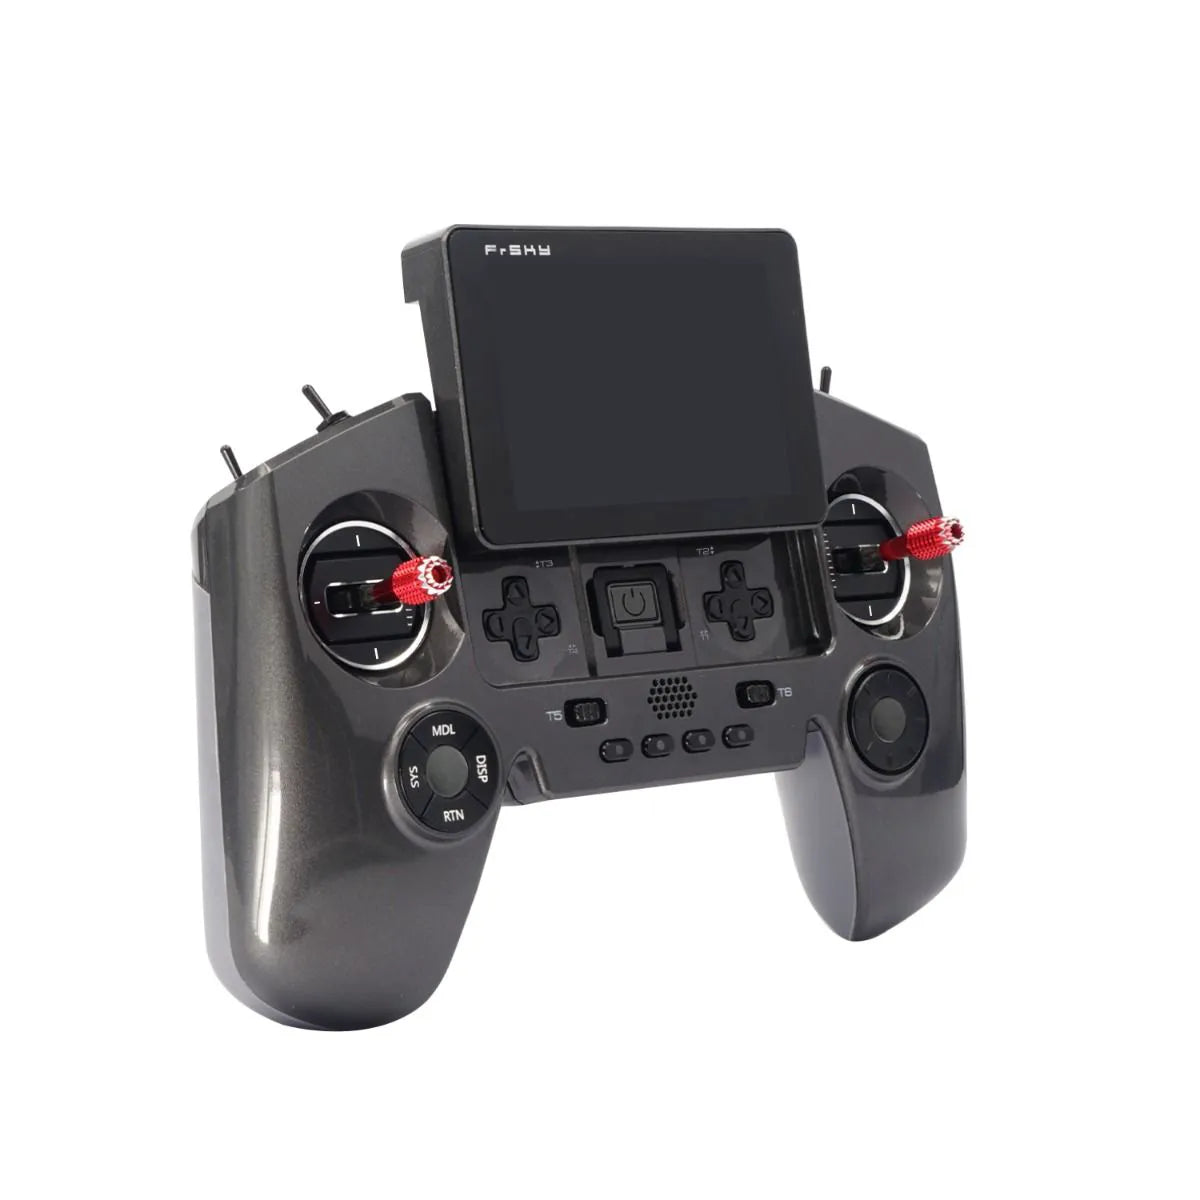 FrSky TWIN X-Lite S Transmitter - Dual 2.4G Radio System 24Channels 3.5” Color Screen 6-axis Gyroscope Sensor FPV Drone Airplane Remote Controller